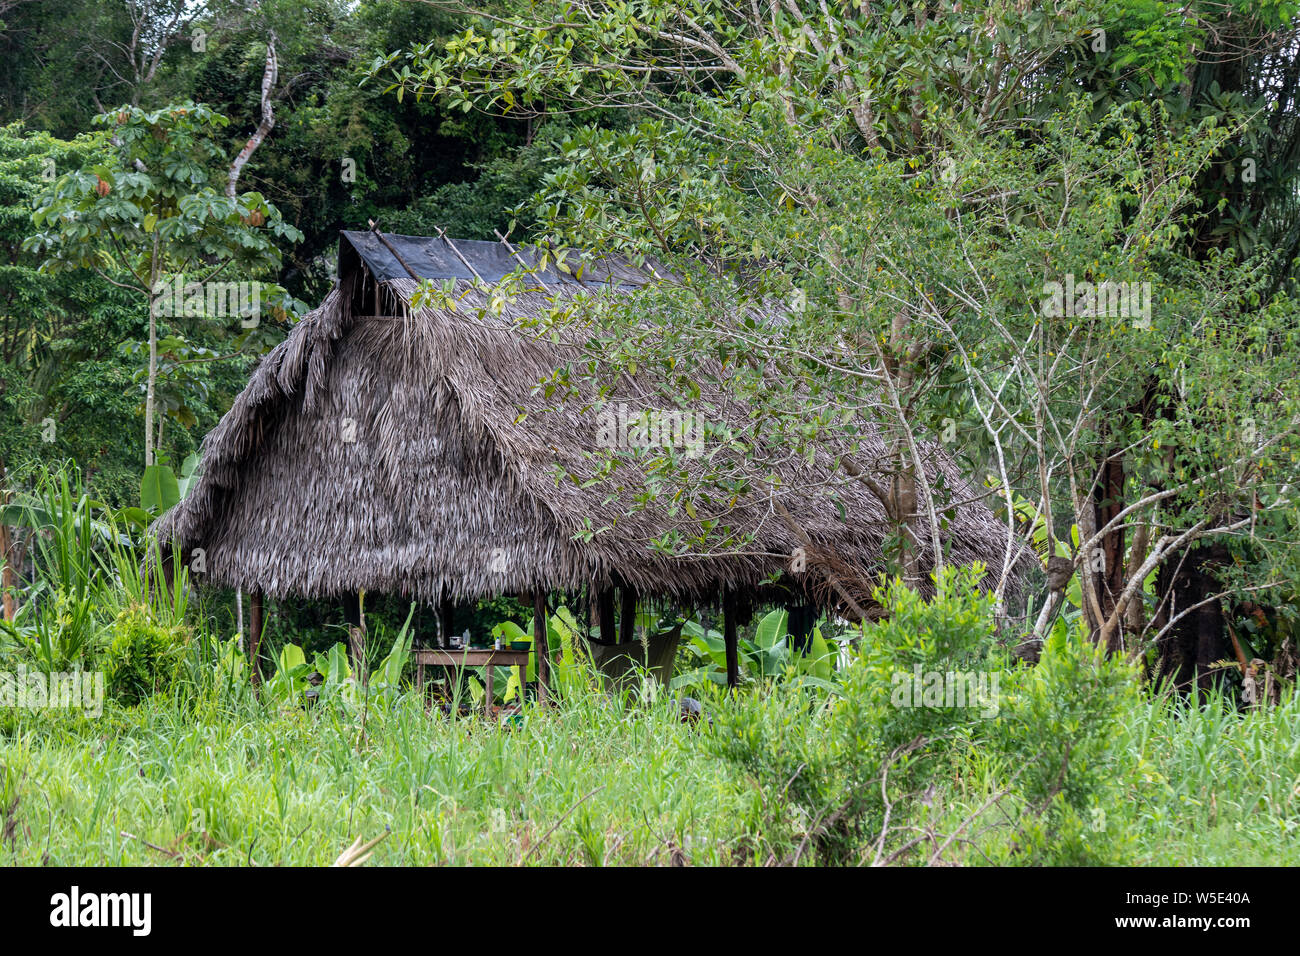 Thatched-roof Ranger Station on the Amazon River in Peru Stock Photo - Alamy